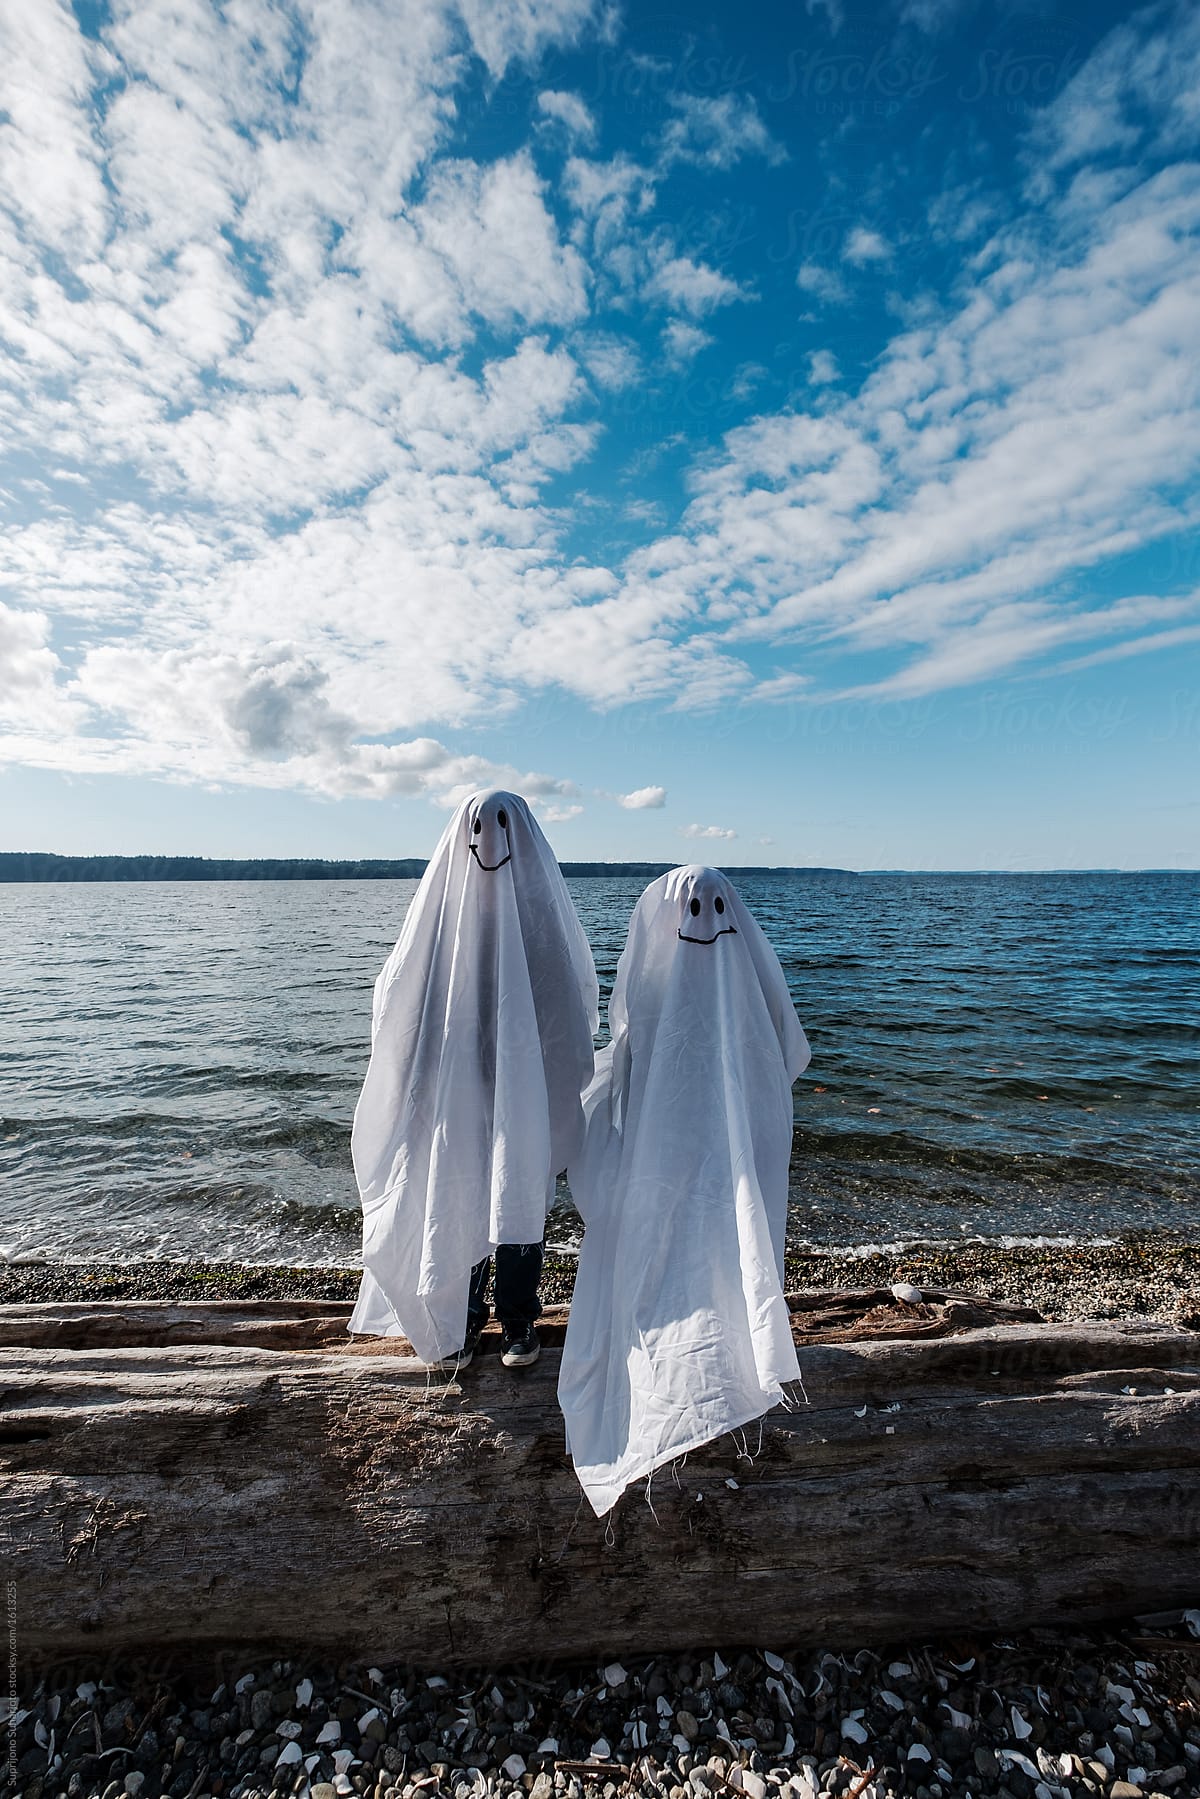 Two Kids in Ghost Costume Celebrating Halloween